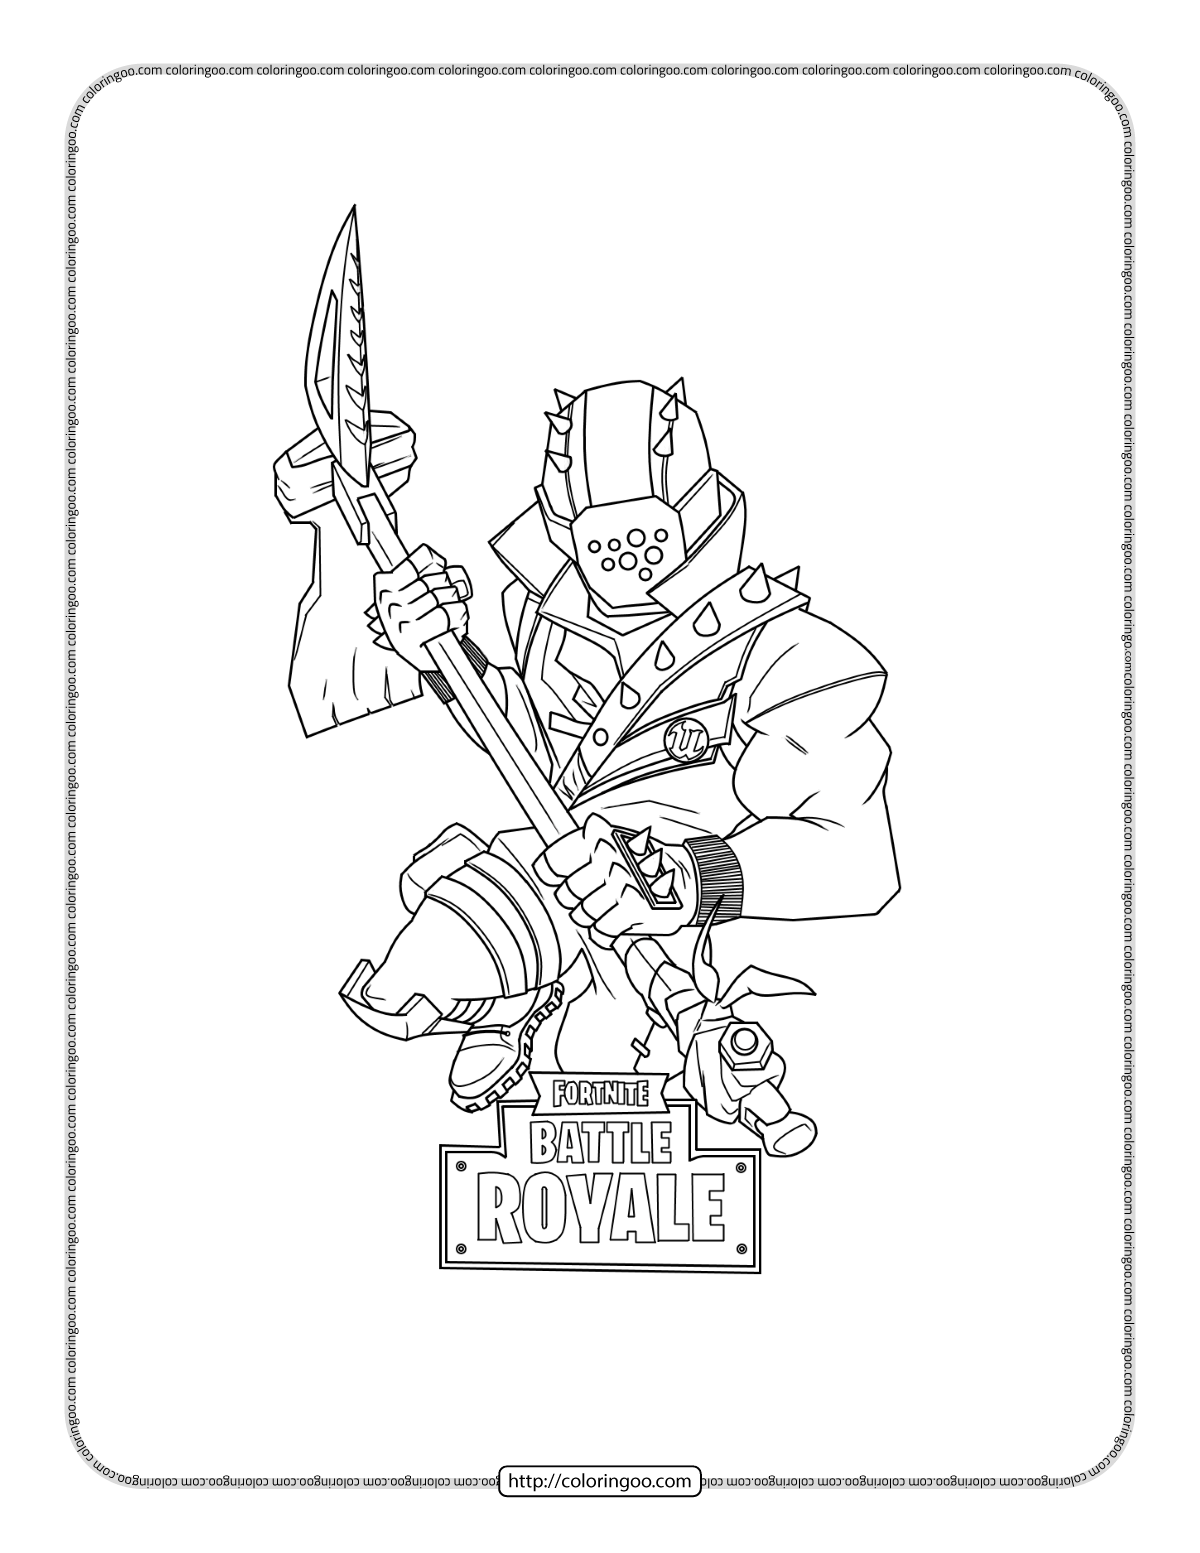 fortnite game battle royale coloring pages